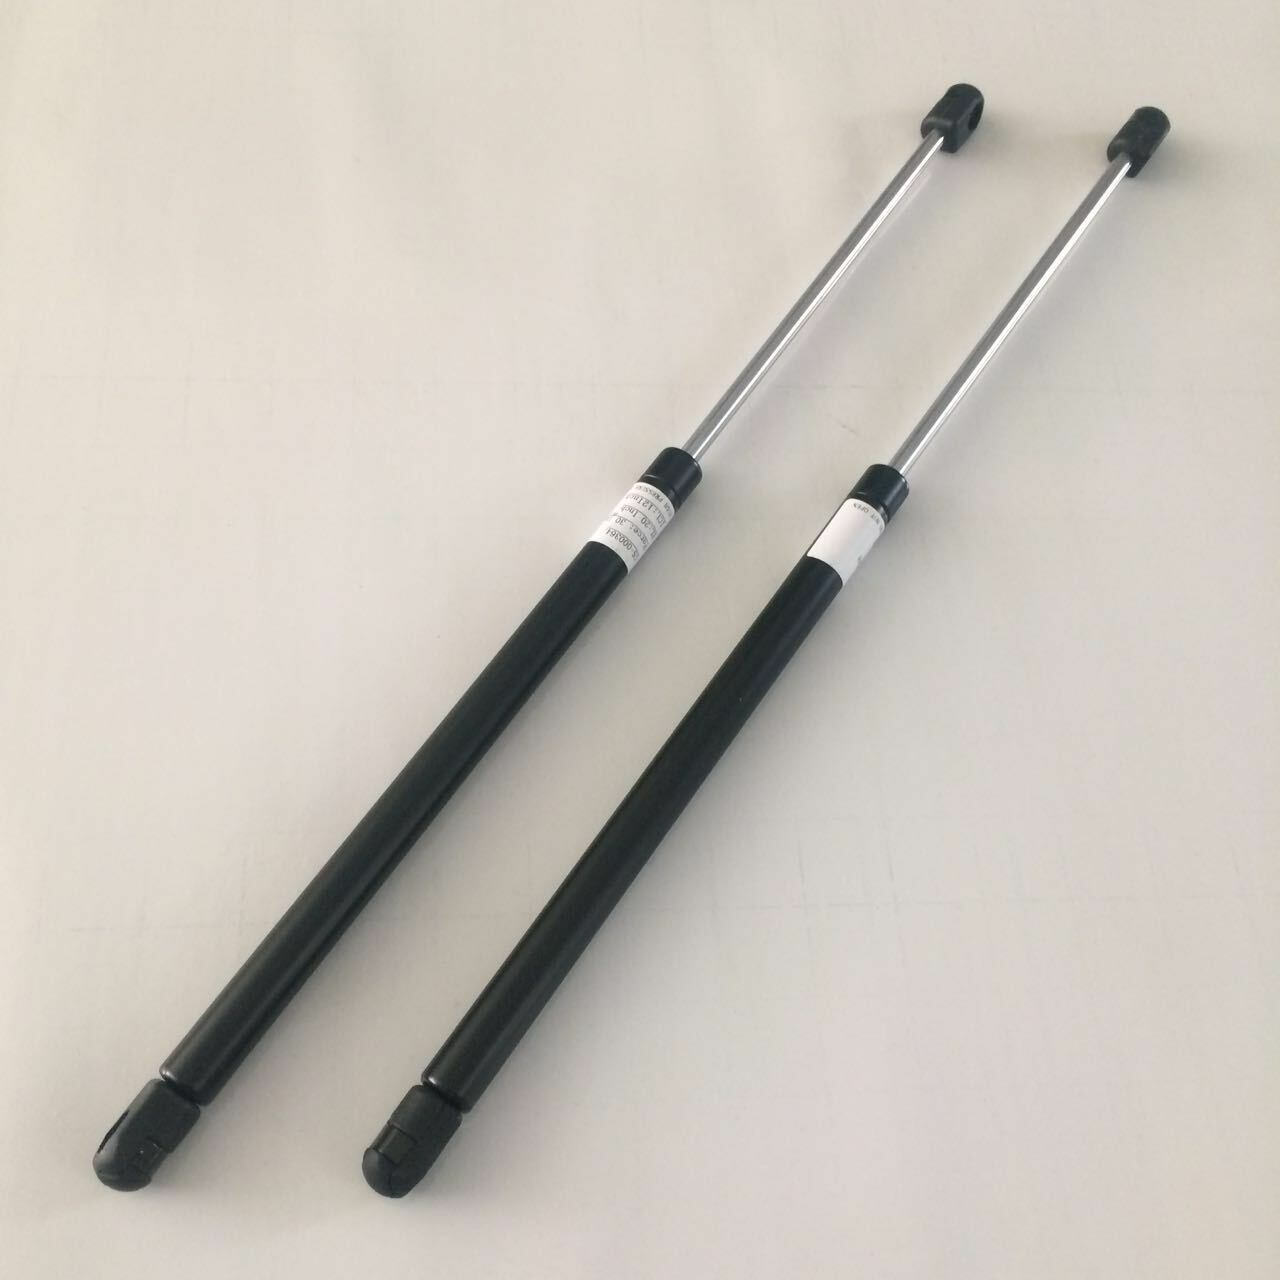 Two Fits Aston Martin DB7 Vantage 1993 To 2003 Front Hood Lift Supports